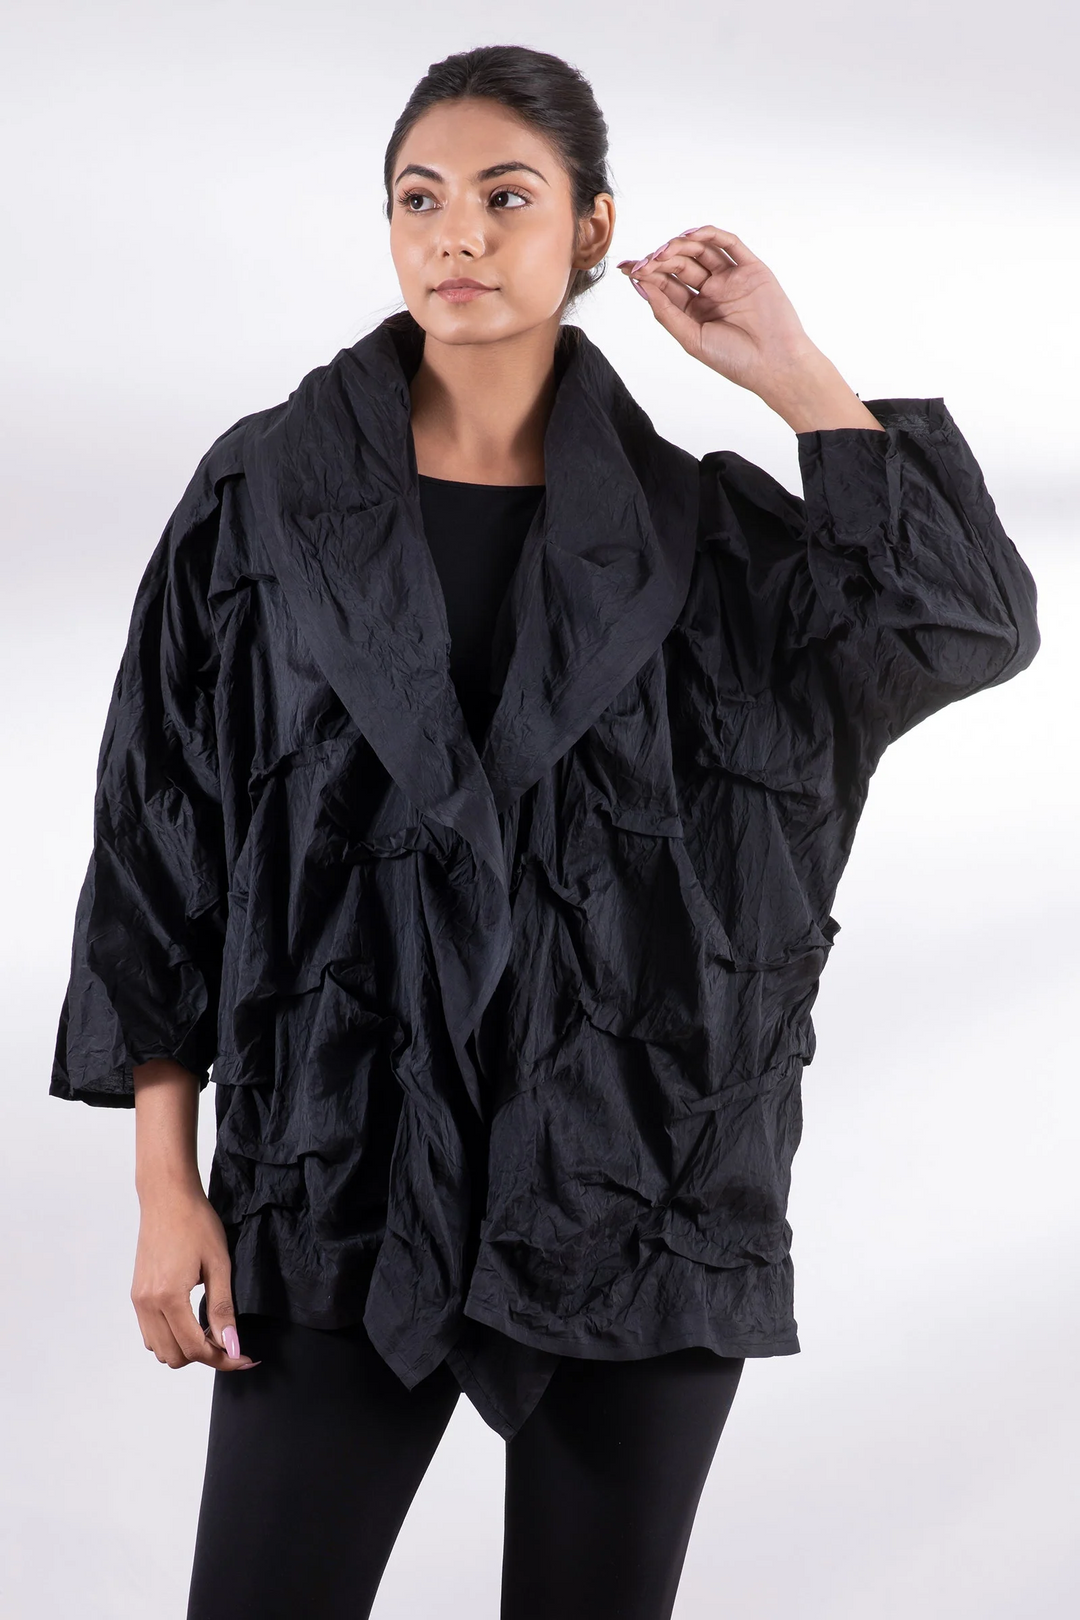 DYED COTTON SILK HEAVY VOILE WAVY TUCK COCOON JACKET - dh1063-blk -